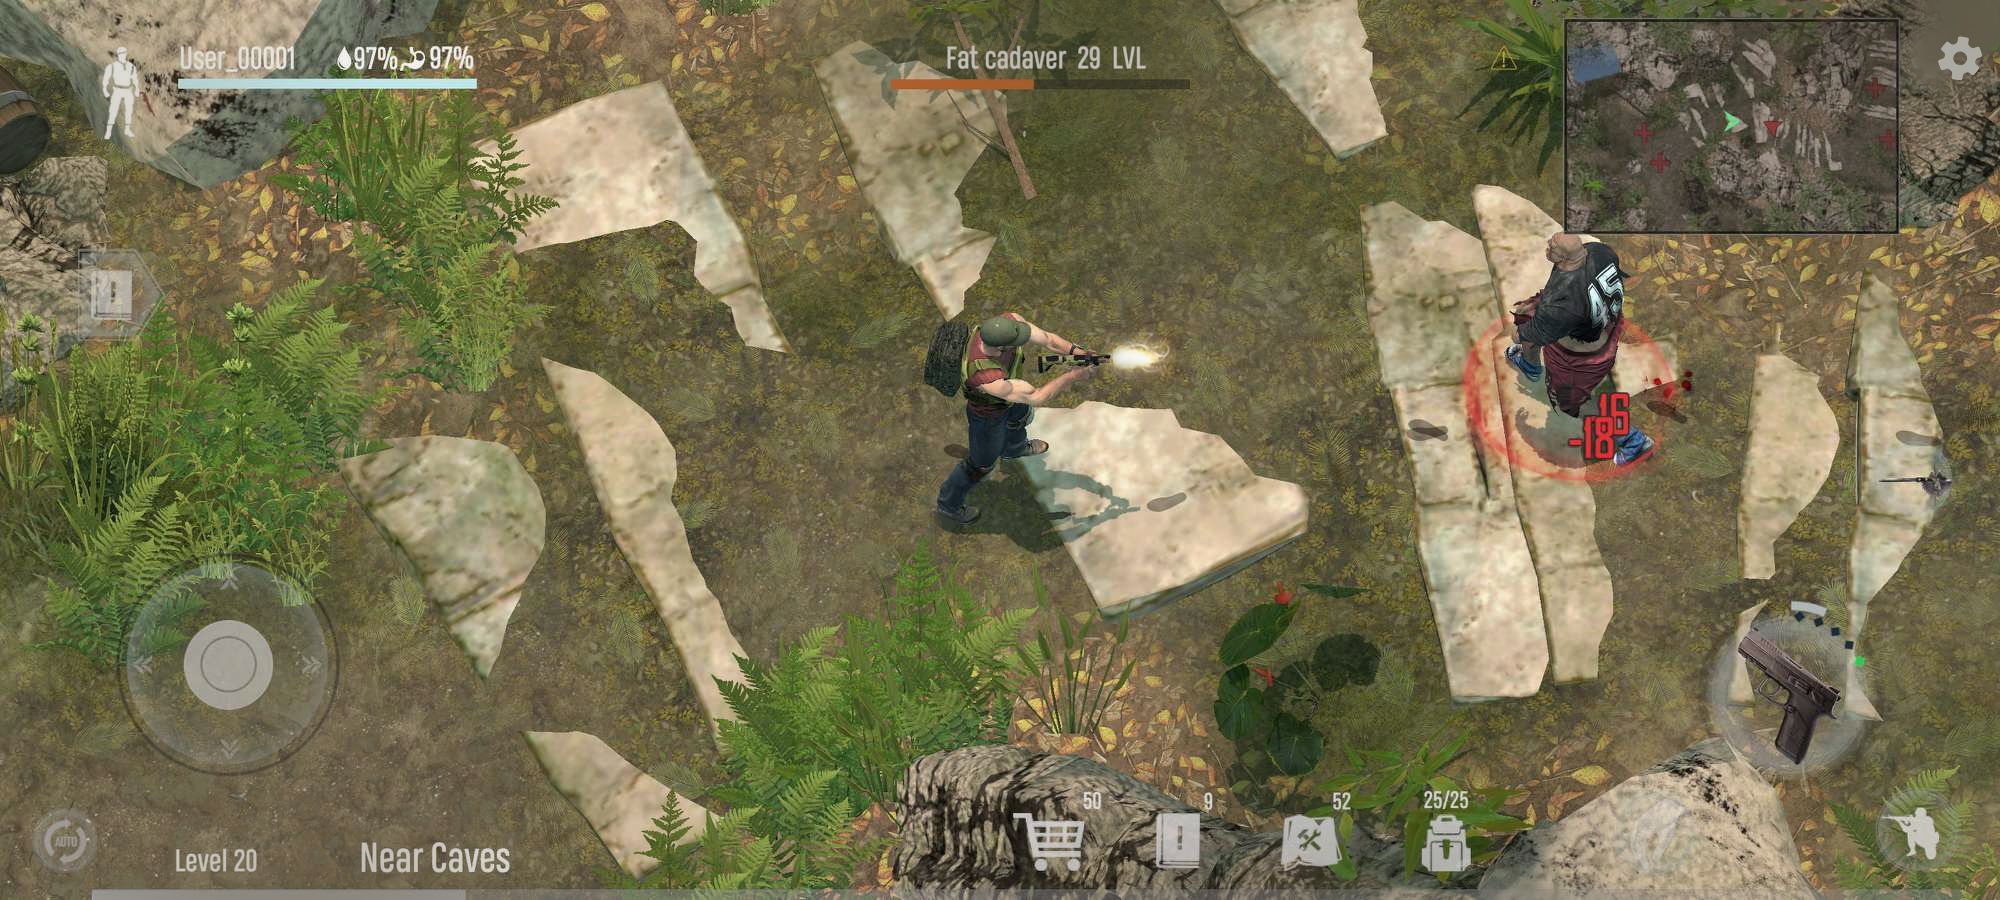 Dead Island: Survival RPG - Android game screenshots.